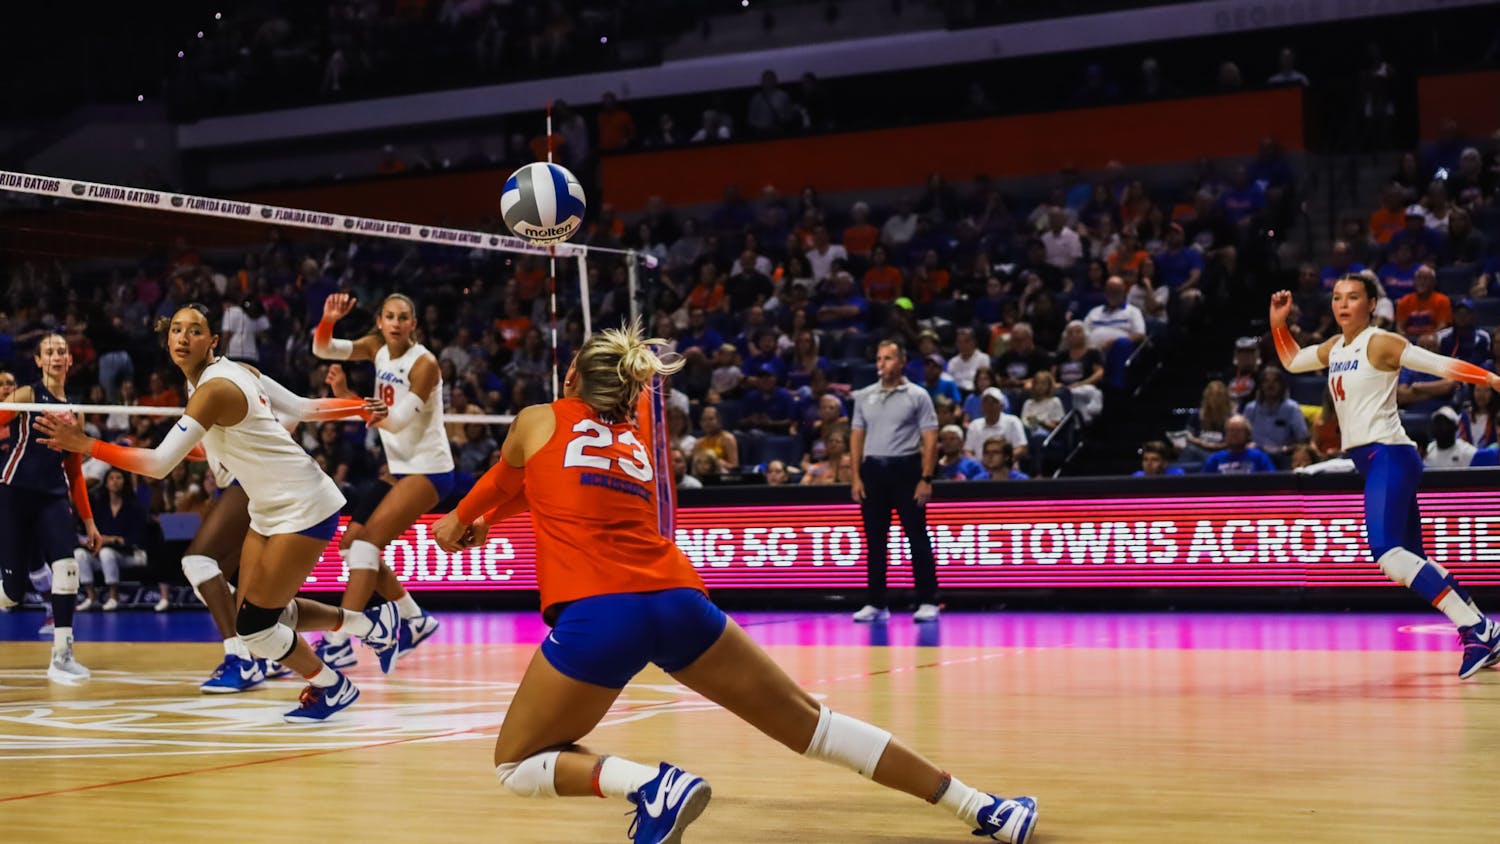 Senior libero Elli McKissock dives to set the ball in the Gators' 3-0 loss to the Auburn Tigers on Friday, Oct. 6, 2023.